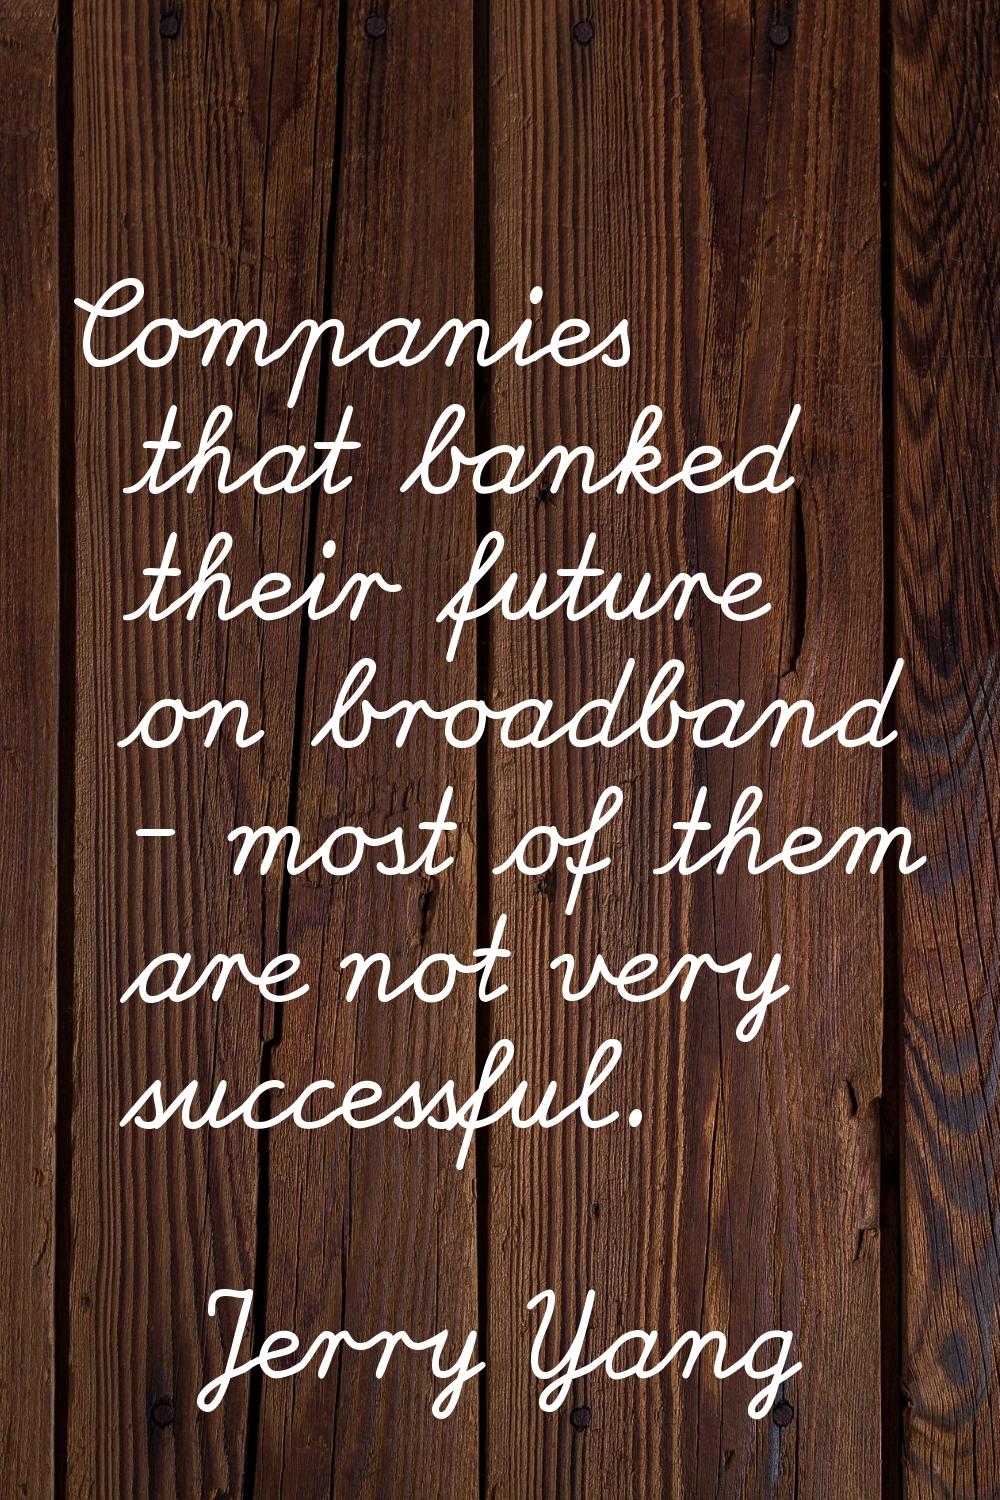 Companies that banked their future on broadband - most of them are not very successful.